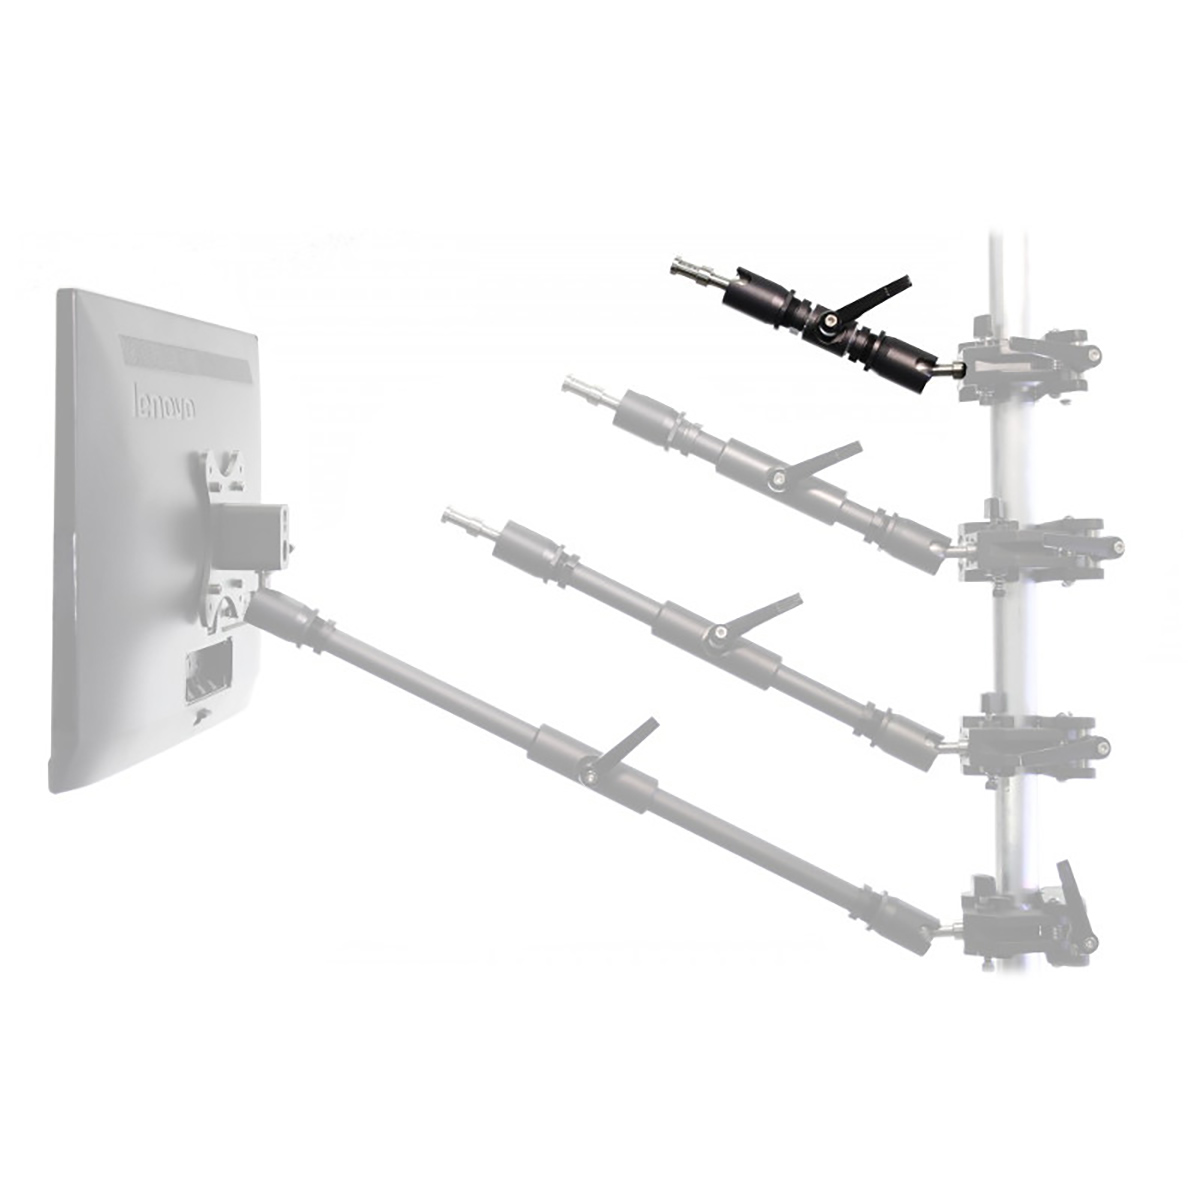 9.Solutions Double Joint Arm long (660mm)